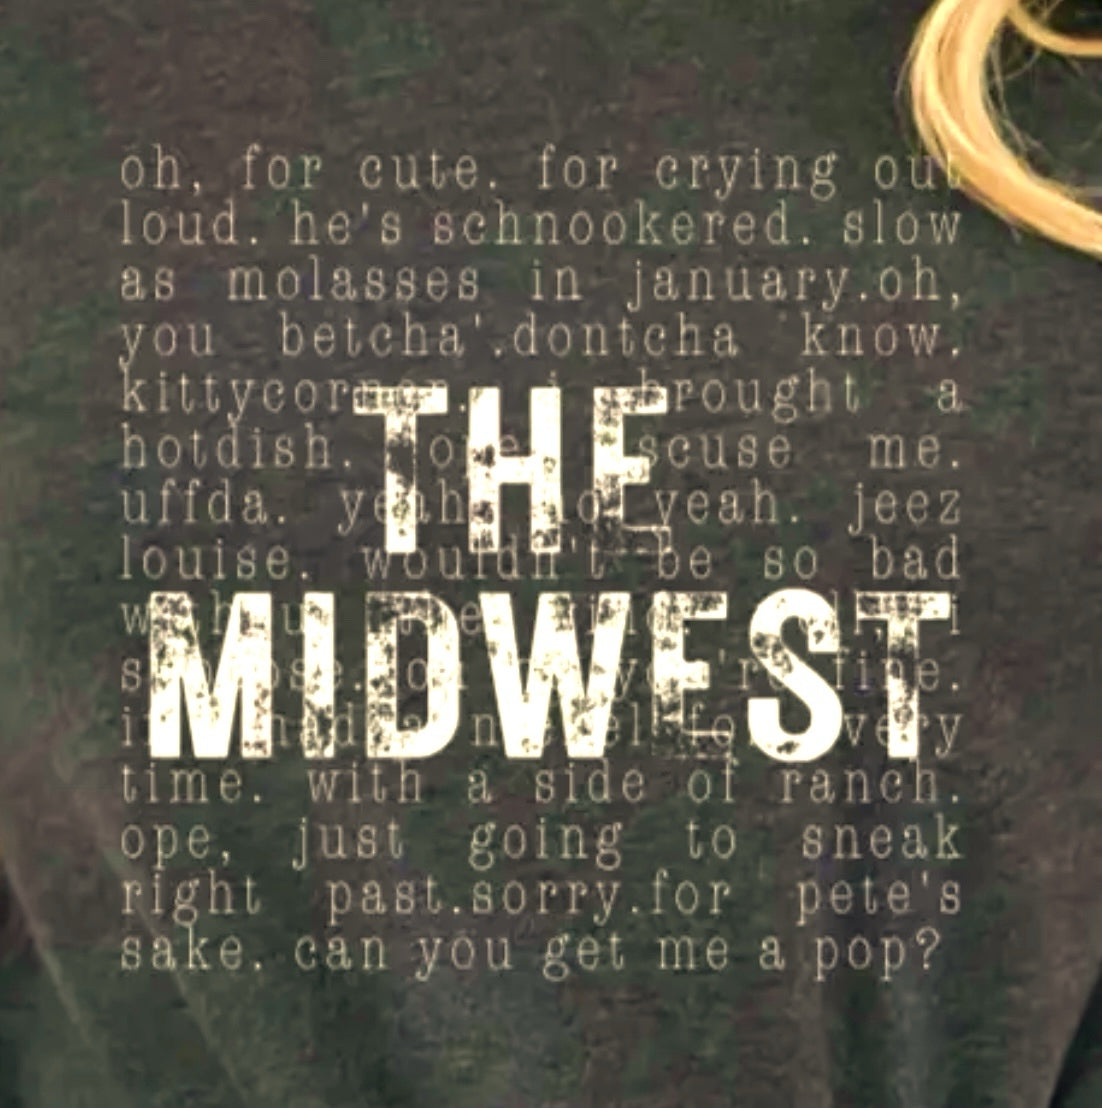 Midwest Sayings Graphic Tee